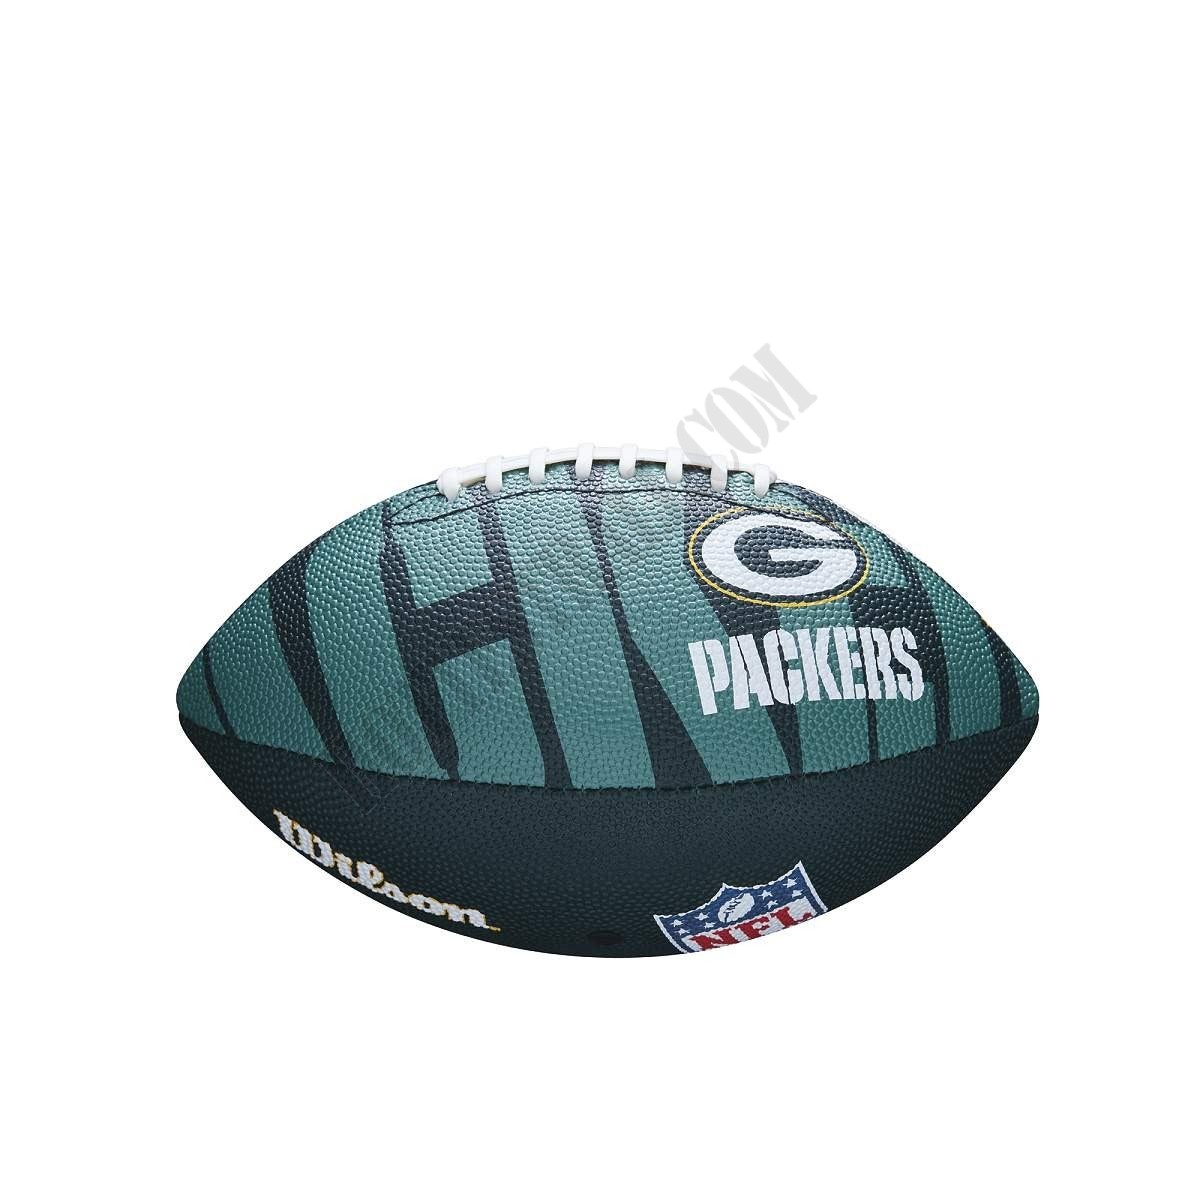 NFL Team Tailgate Football - Green Bay Packers ● Wilson Promotions - -2